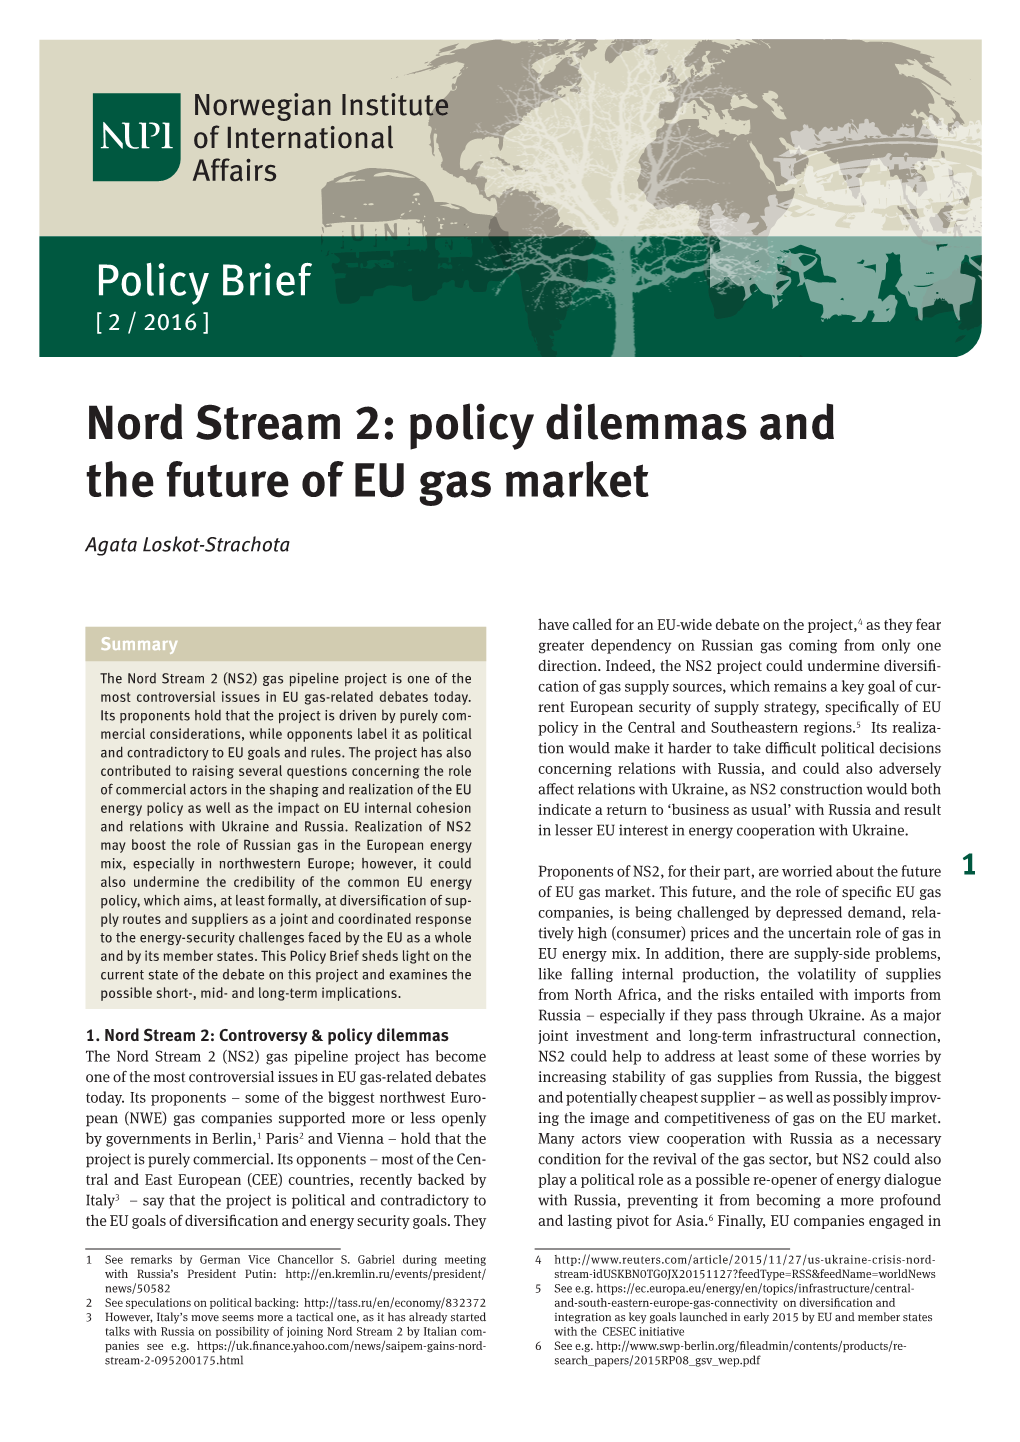 Nord Stream 2: Policy Dilemmas and the Future Of